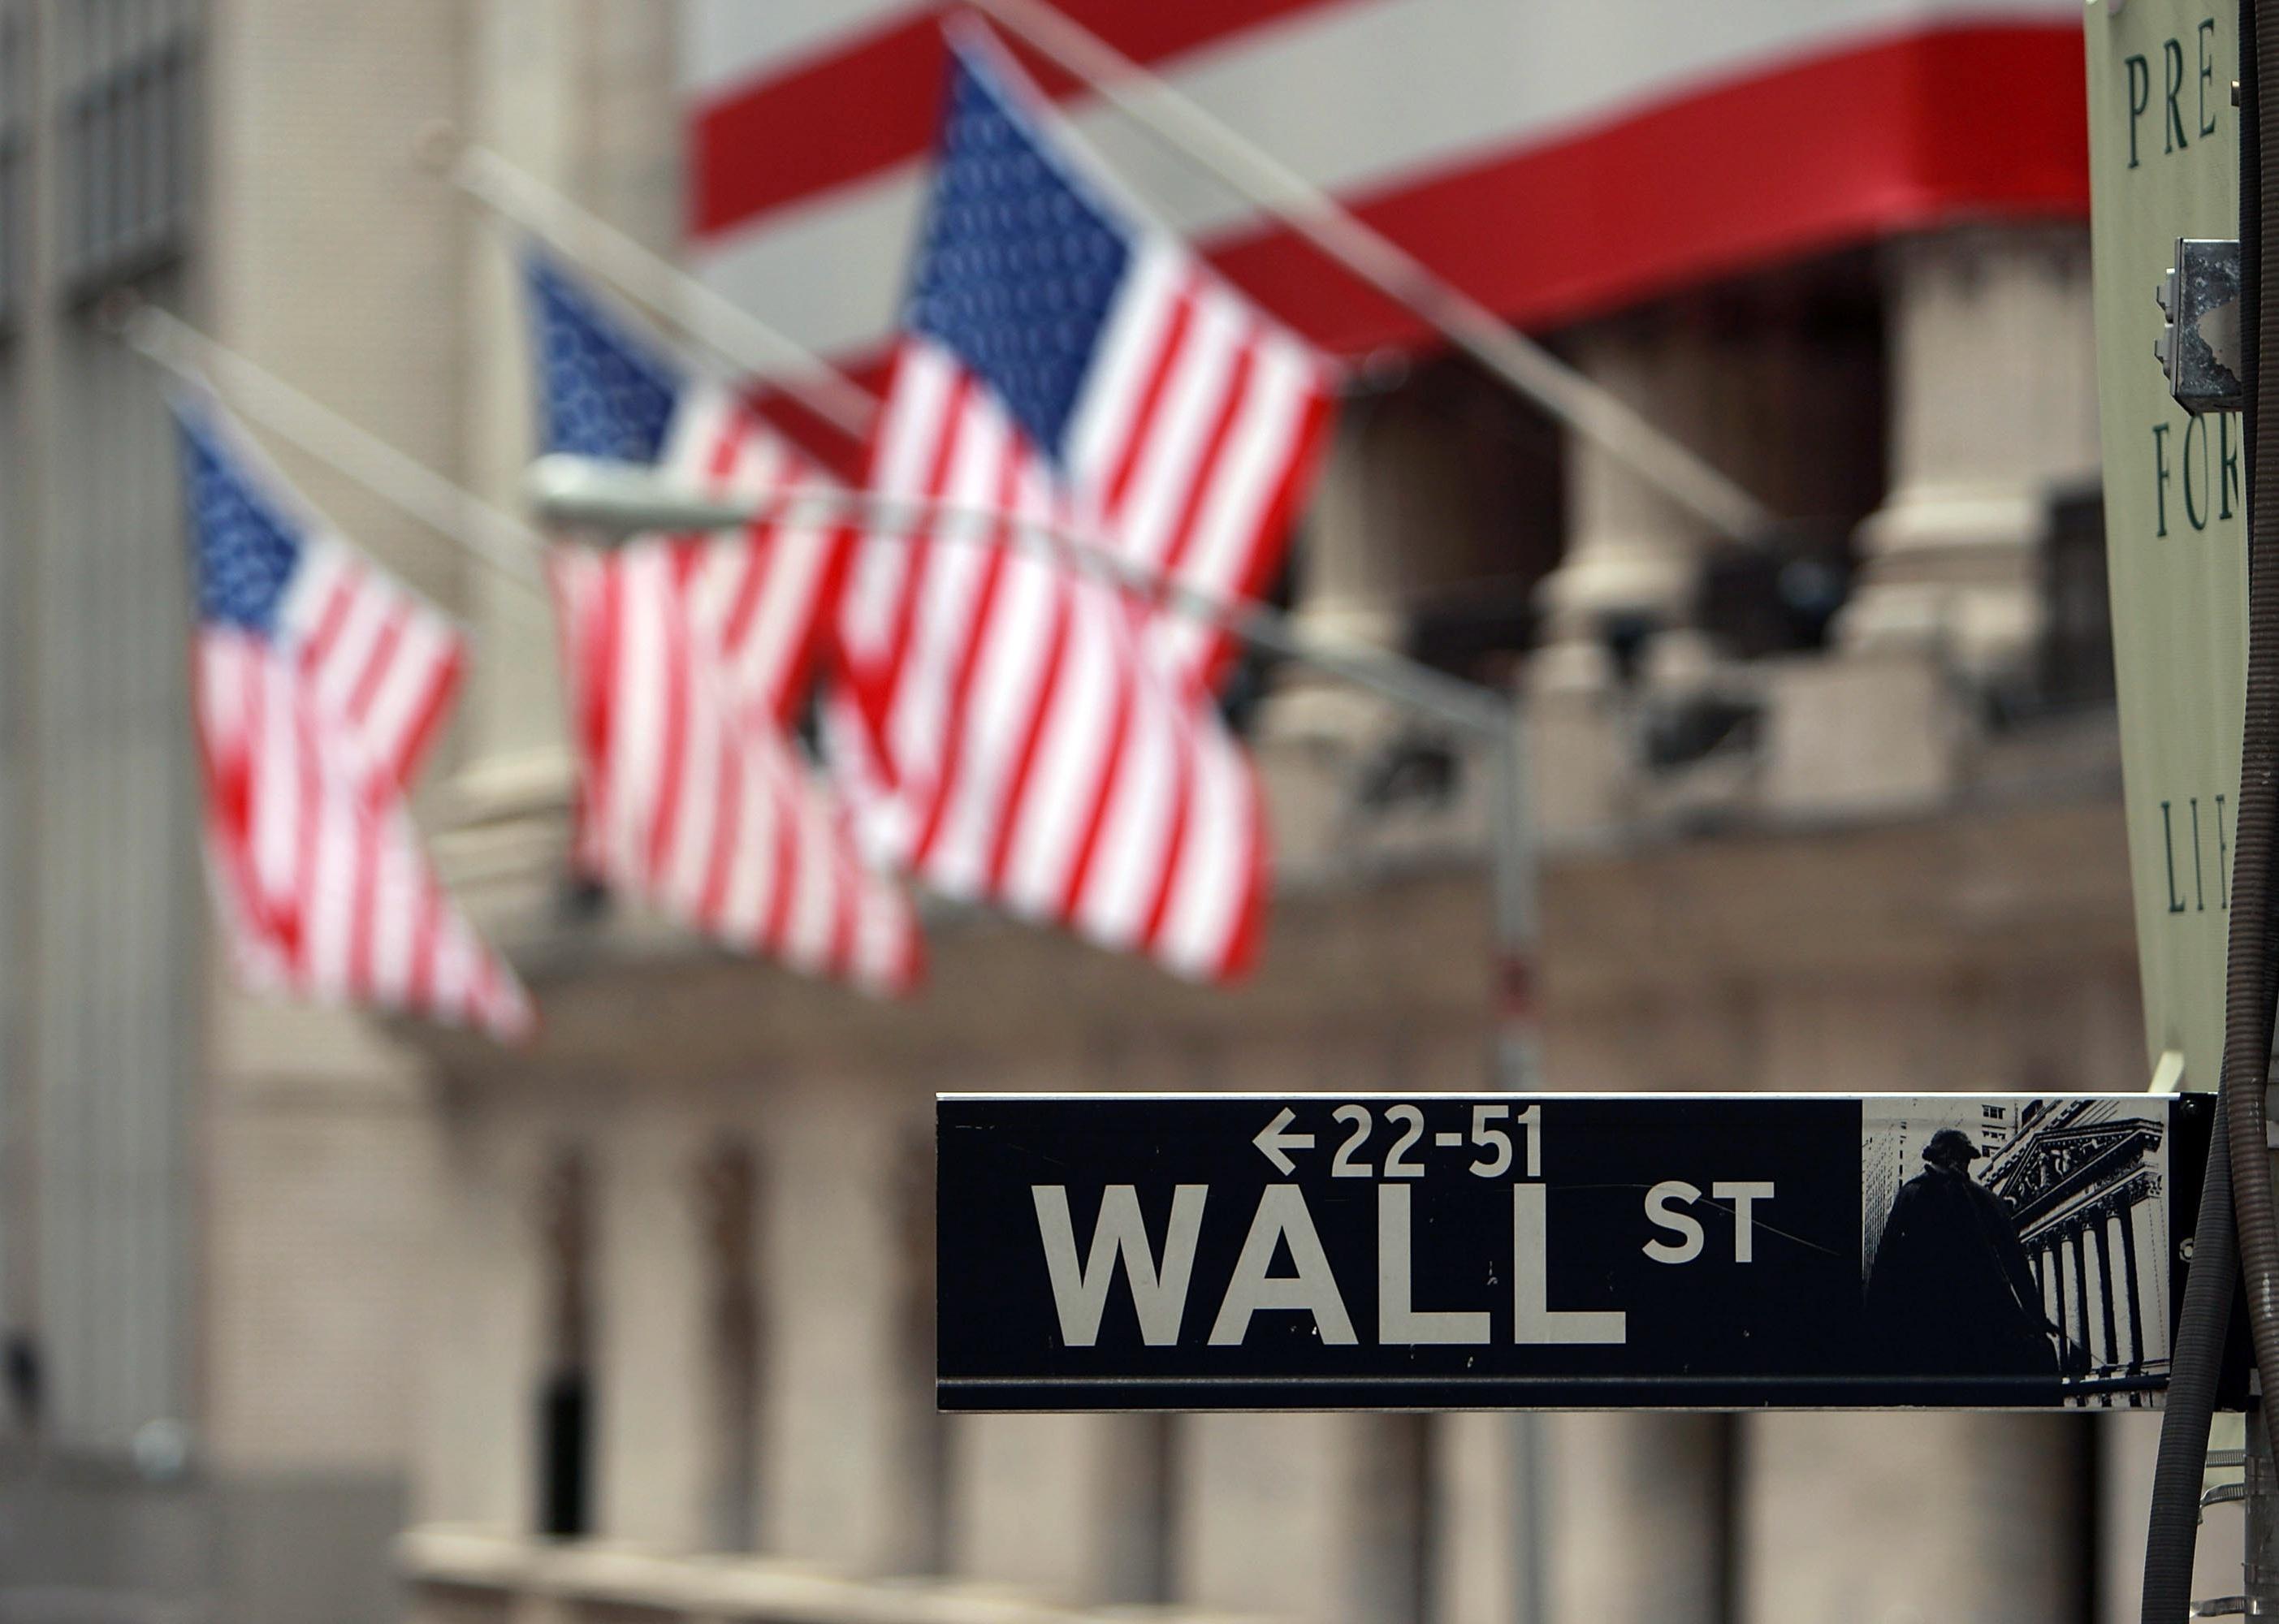 Wall Street sign and American flags.